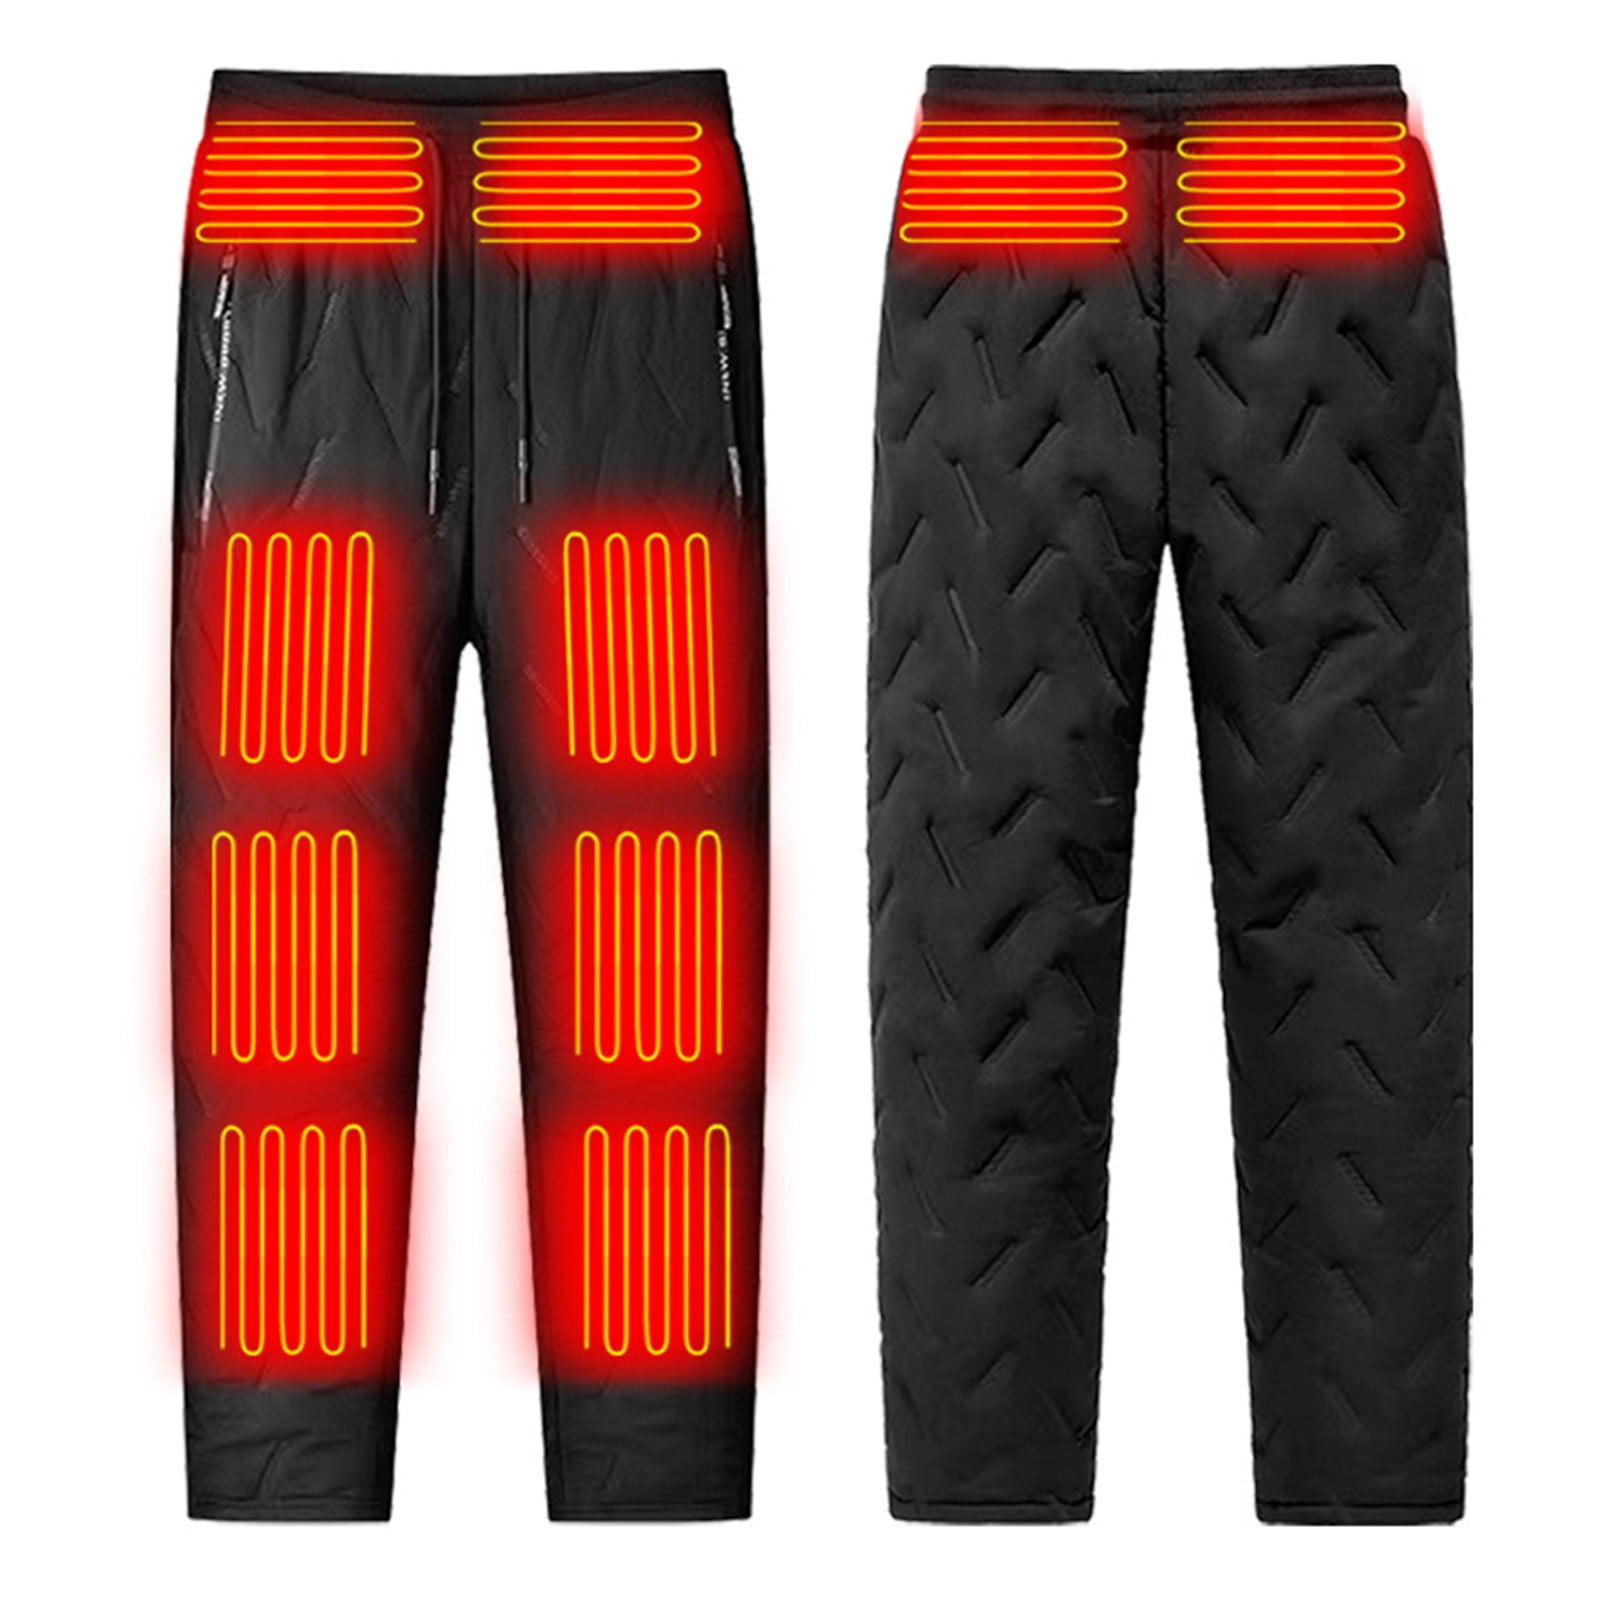 COFEST 10 Heating Areas Heated Pants For Men,Heated Pants With  Fleece,Lightweight USB Electric Heated Pants With 3 Heating Level (Battery  Pack Not